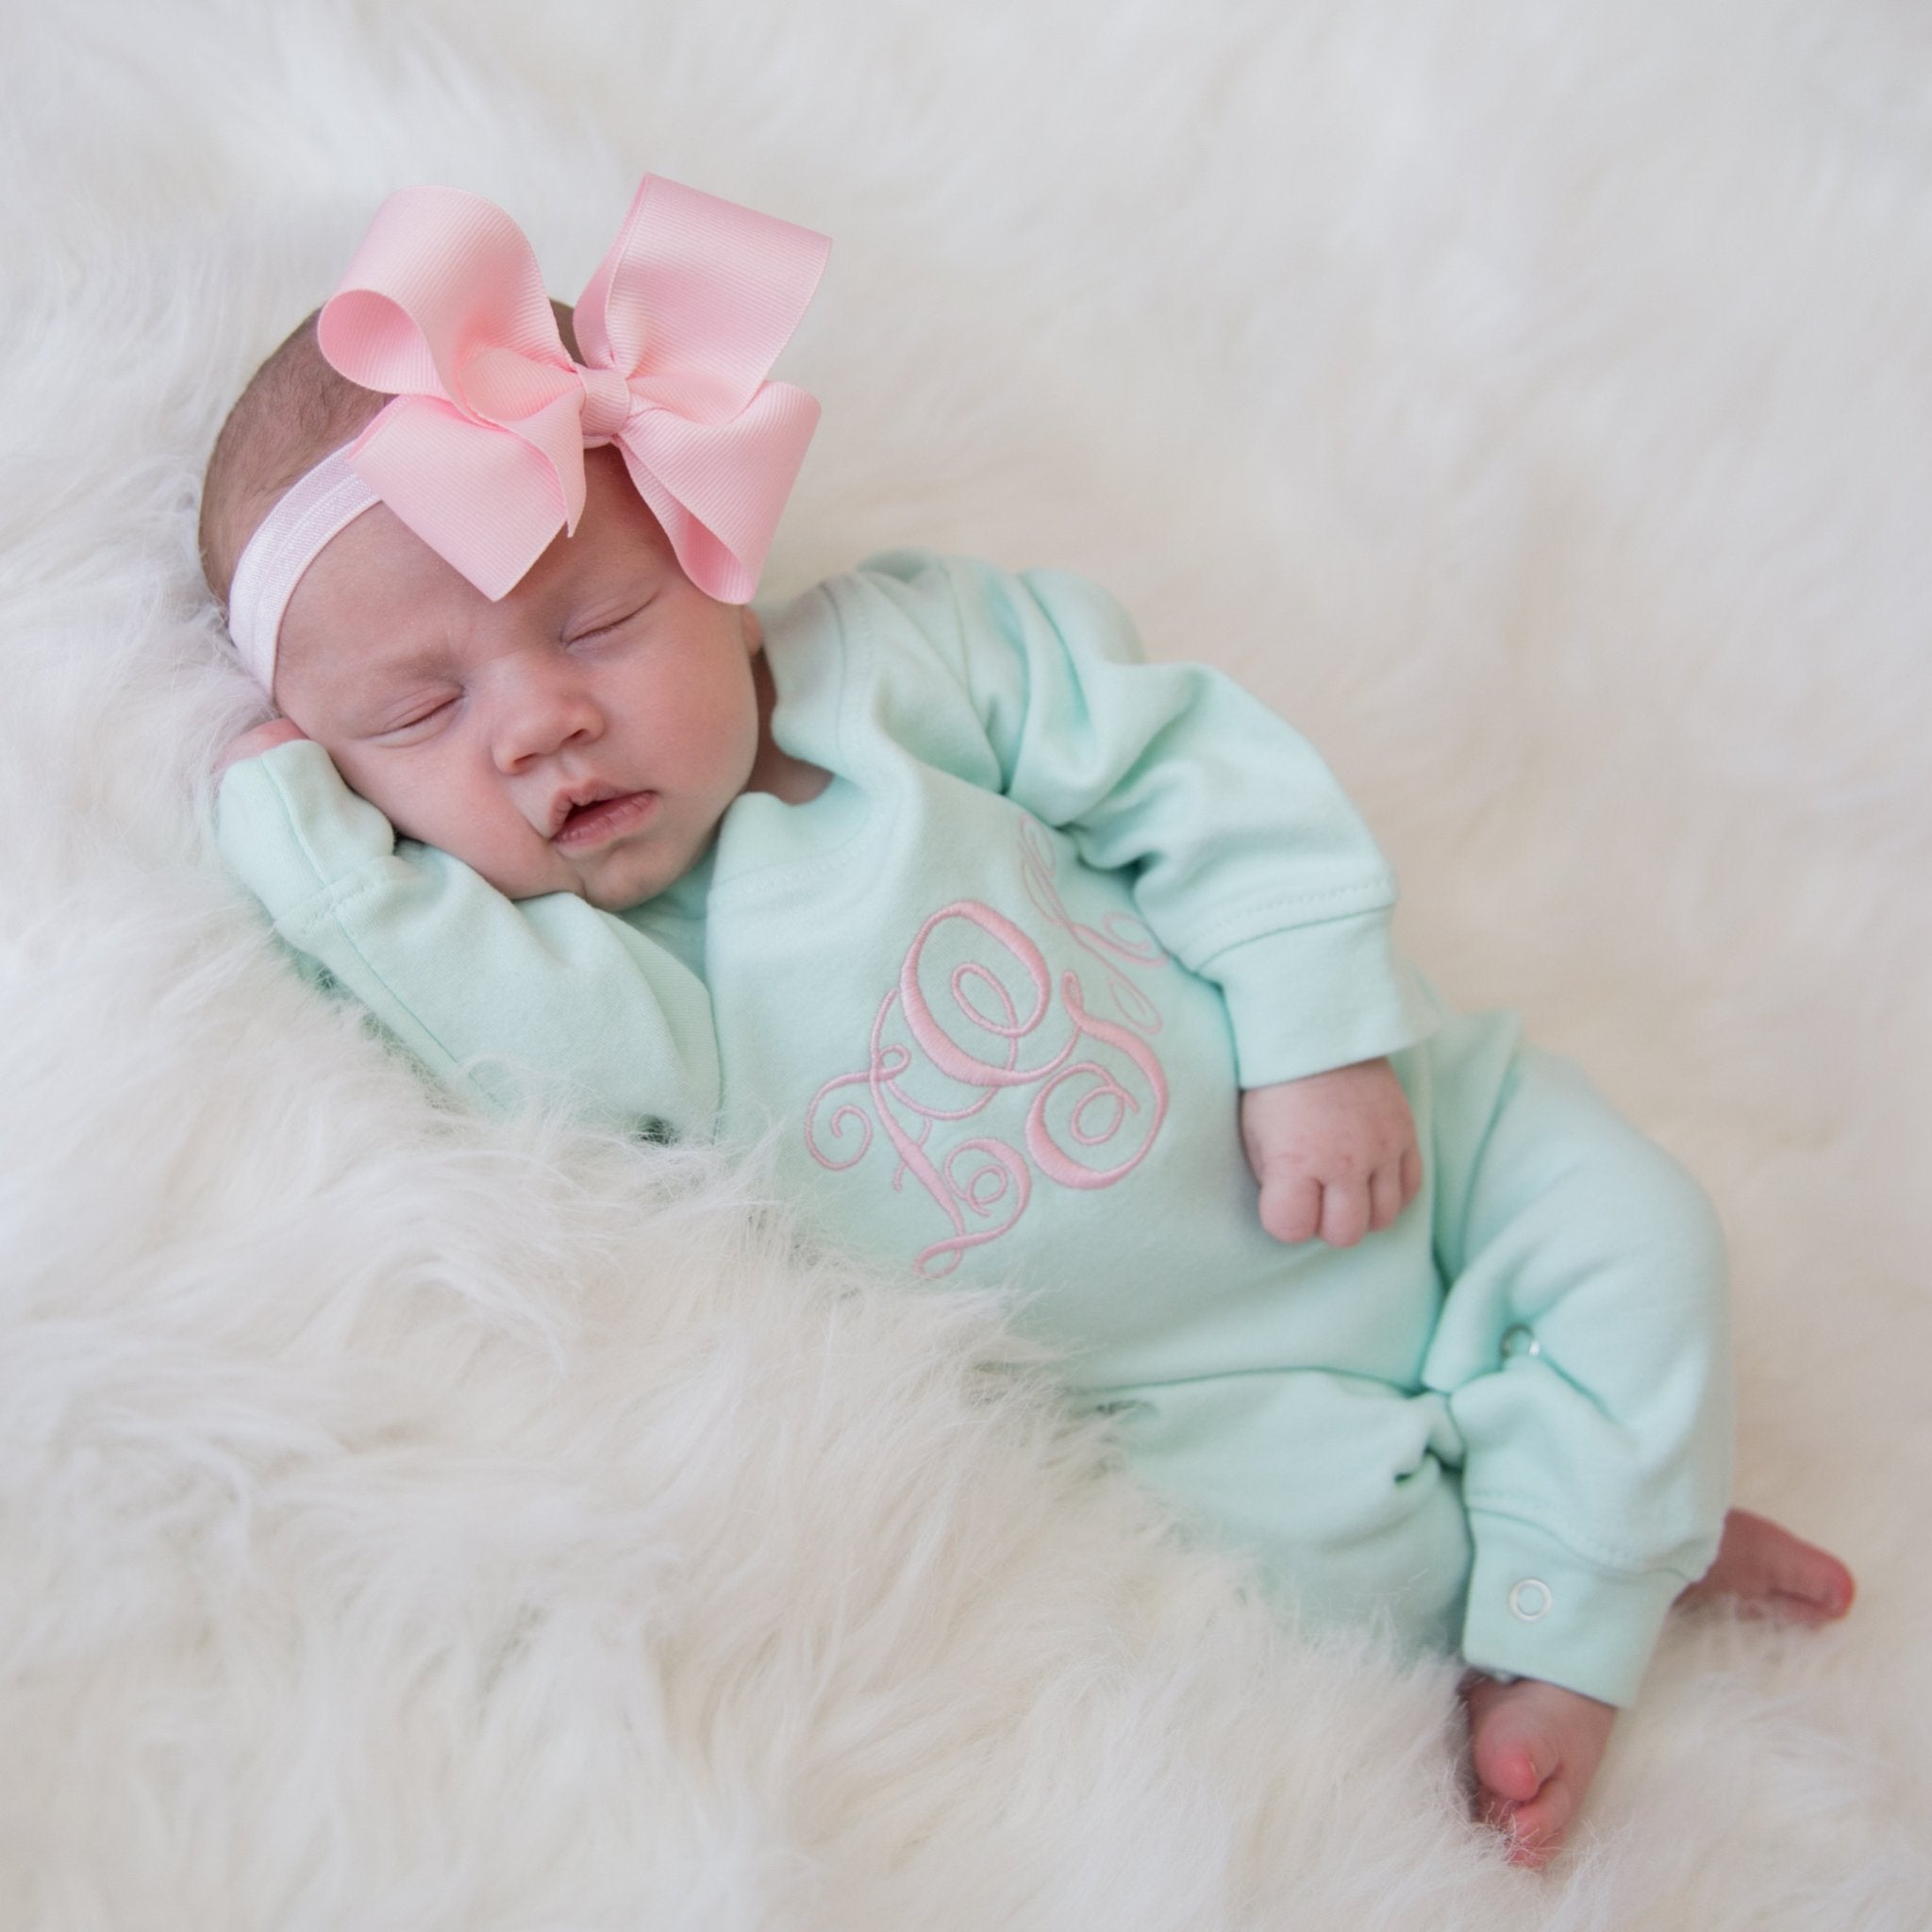 newborn baby coming home outfit